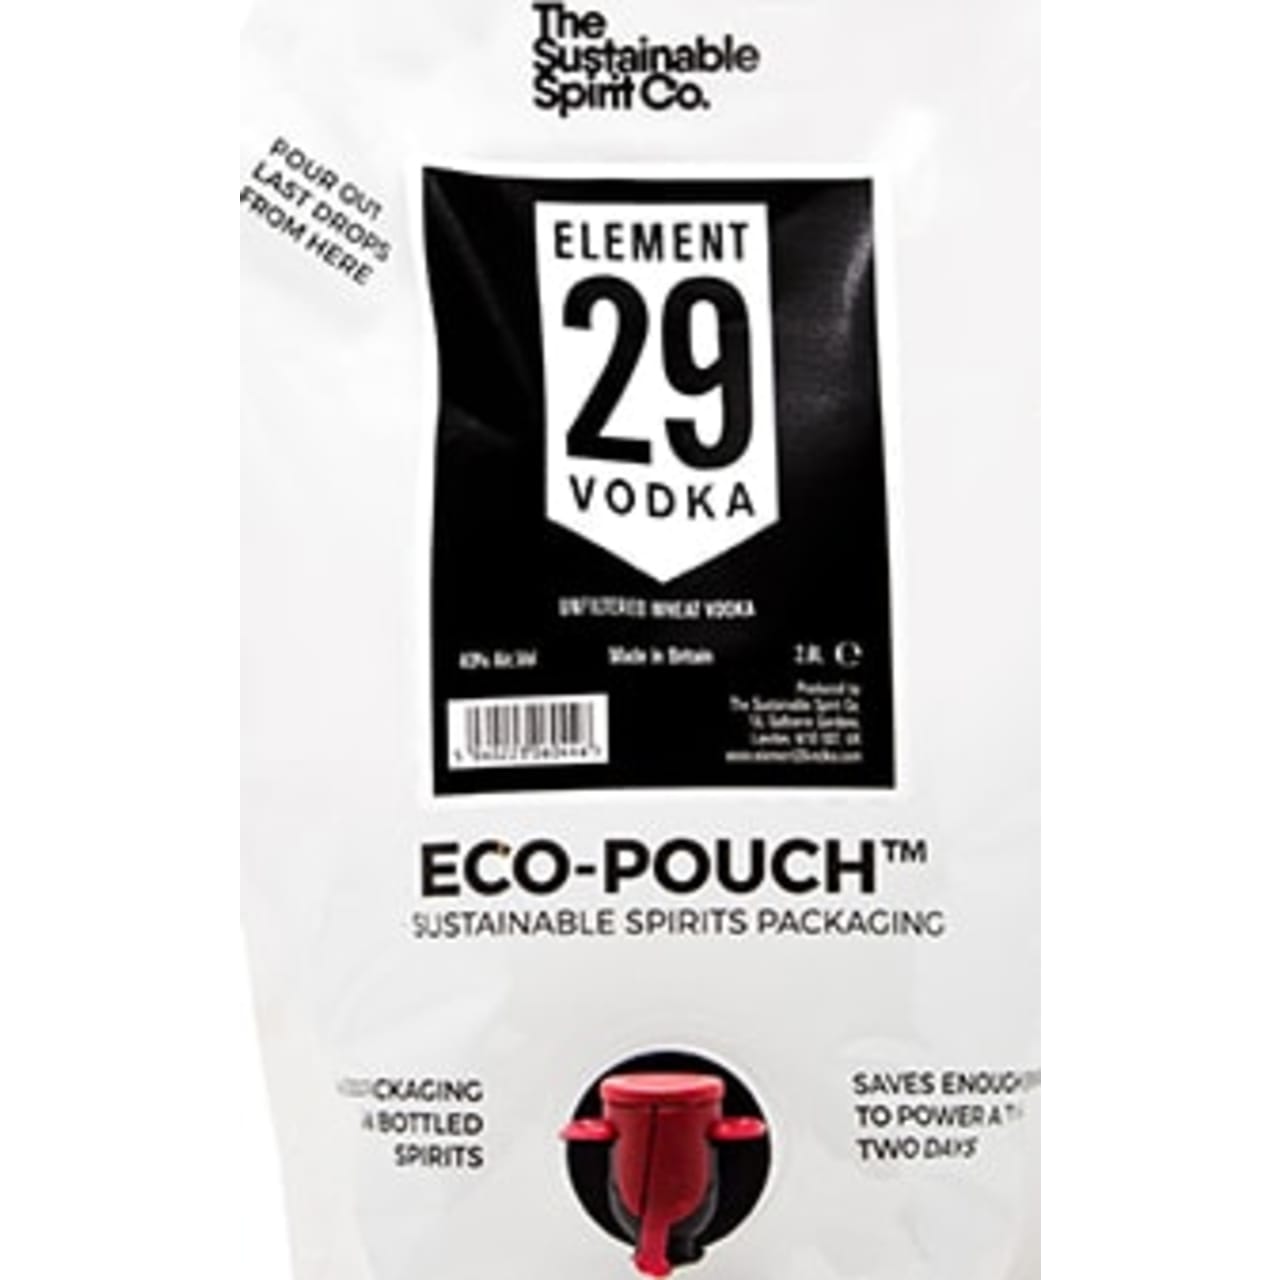 Element 29 is unfiltered resulting in a creamy vodka with notes of cereal and citrus. This eco-pouch refill system allows you to replenish any empty Element 29 Vodka you have, saving money and wastage.